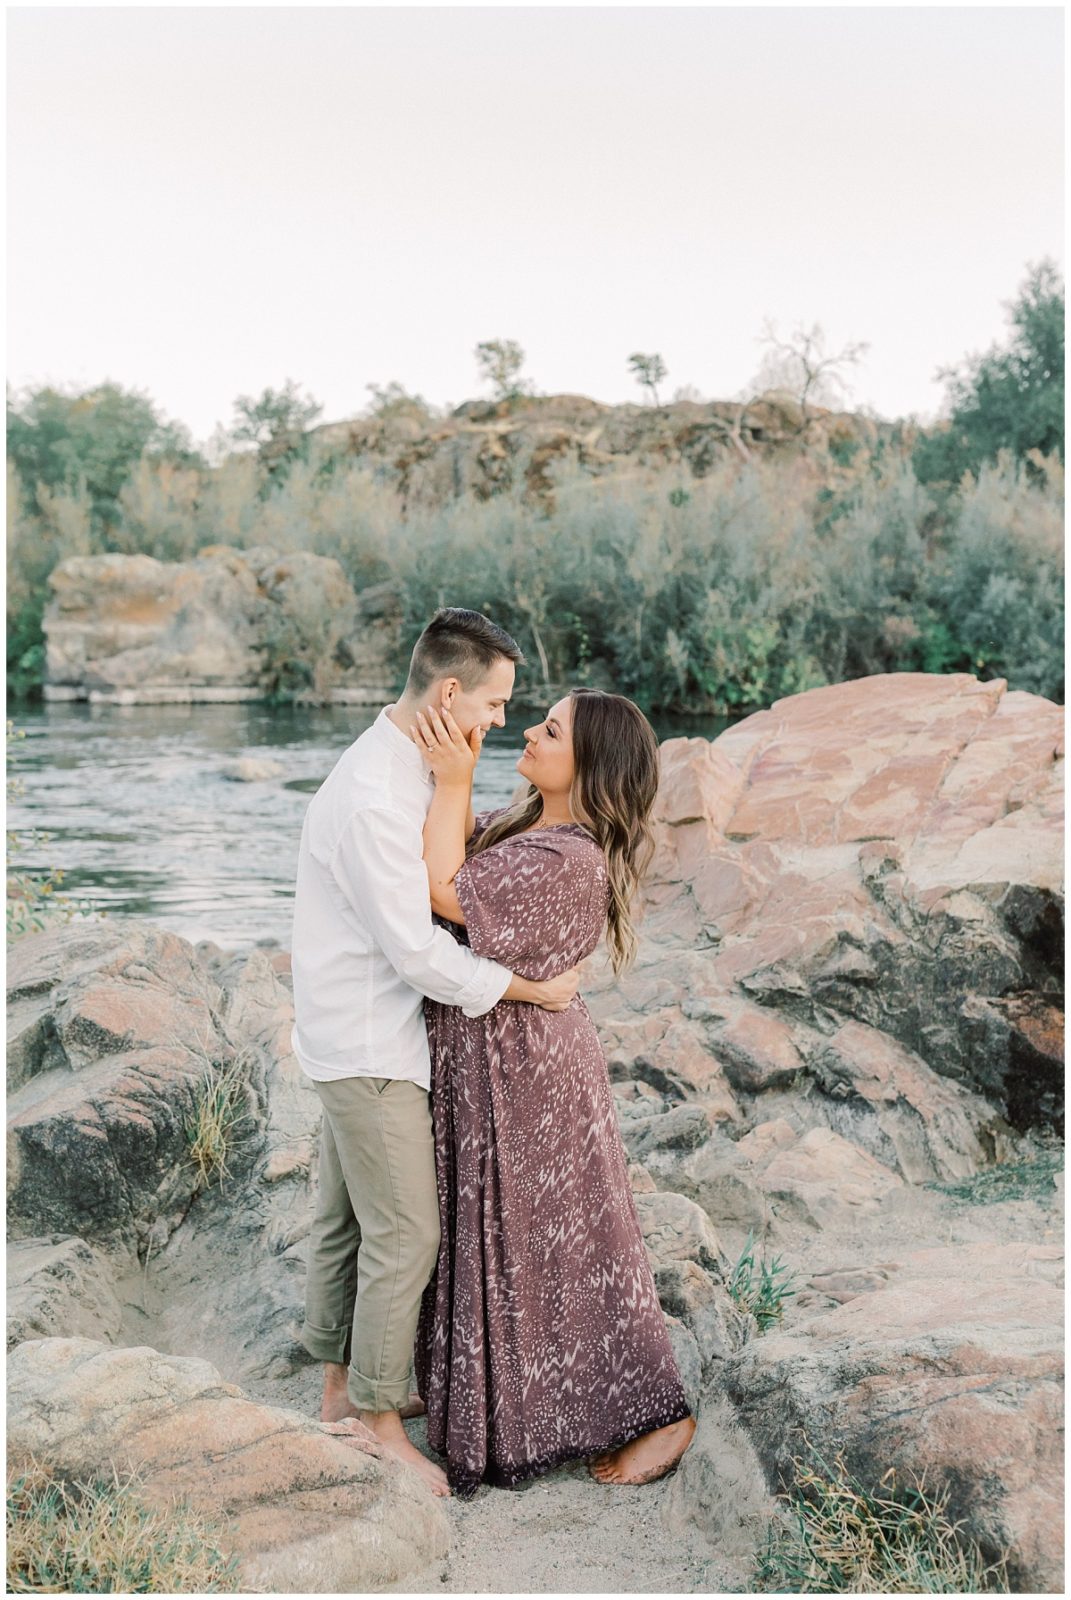 Engagement Photos with Boulders and Water